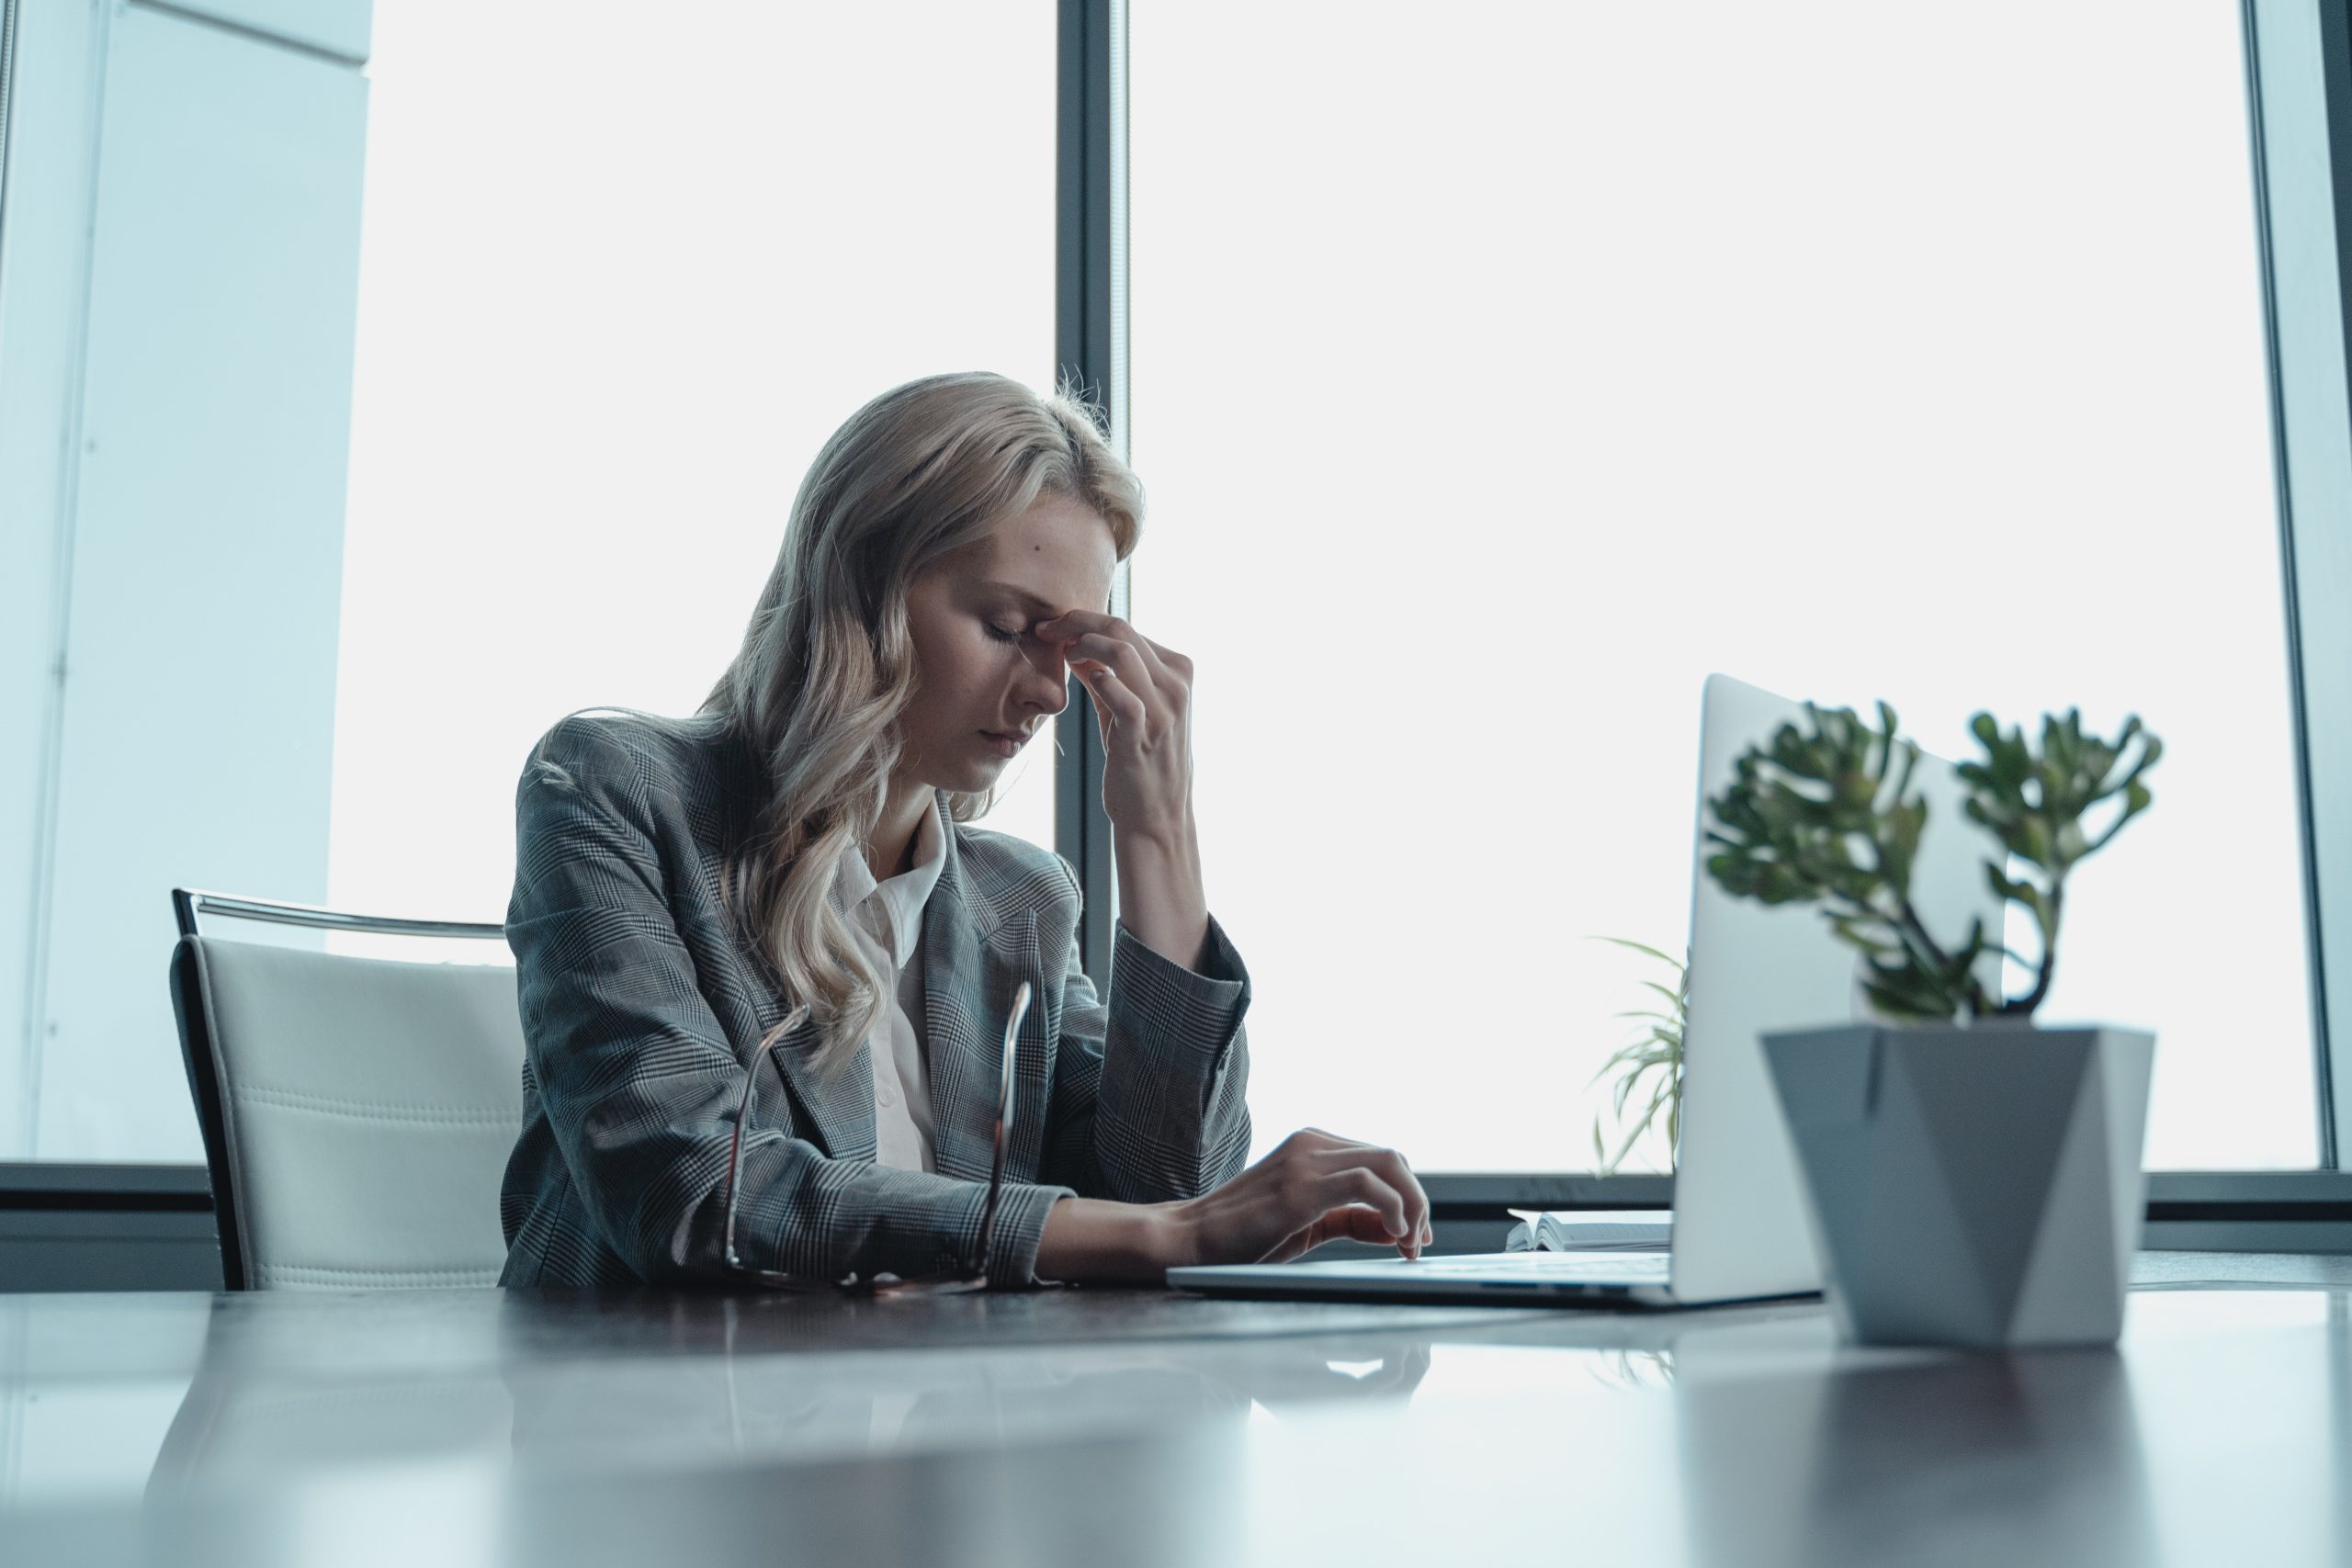 Xx Girl With A Xx Boy A 3g - 3 Alarming Ways Being an 'Insecure Overachiever' Can Hurt You at Work â€” and  How to Break Free - Keystone Staffing